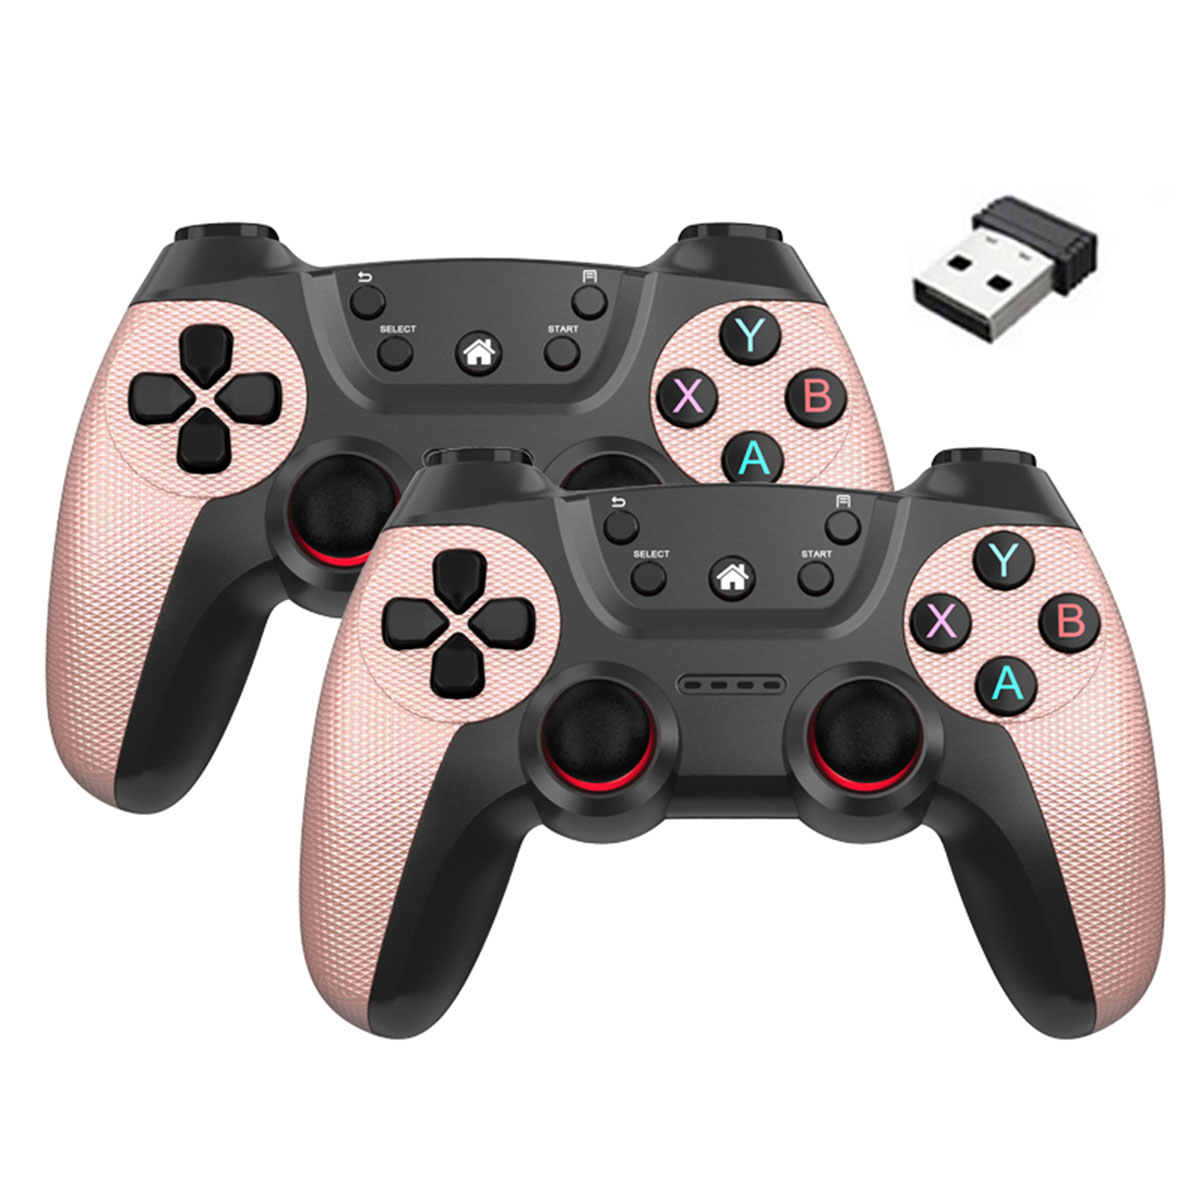 Gamepad,Android-Controller,Gamepad,2.4G,für Doppeltes Controller RESPIEL PC,Android Wireless Rosenrosa